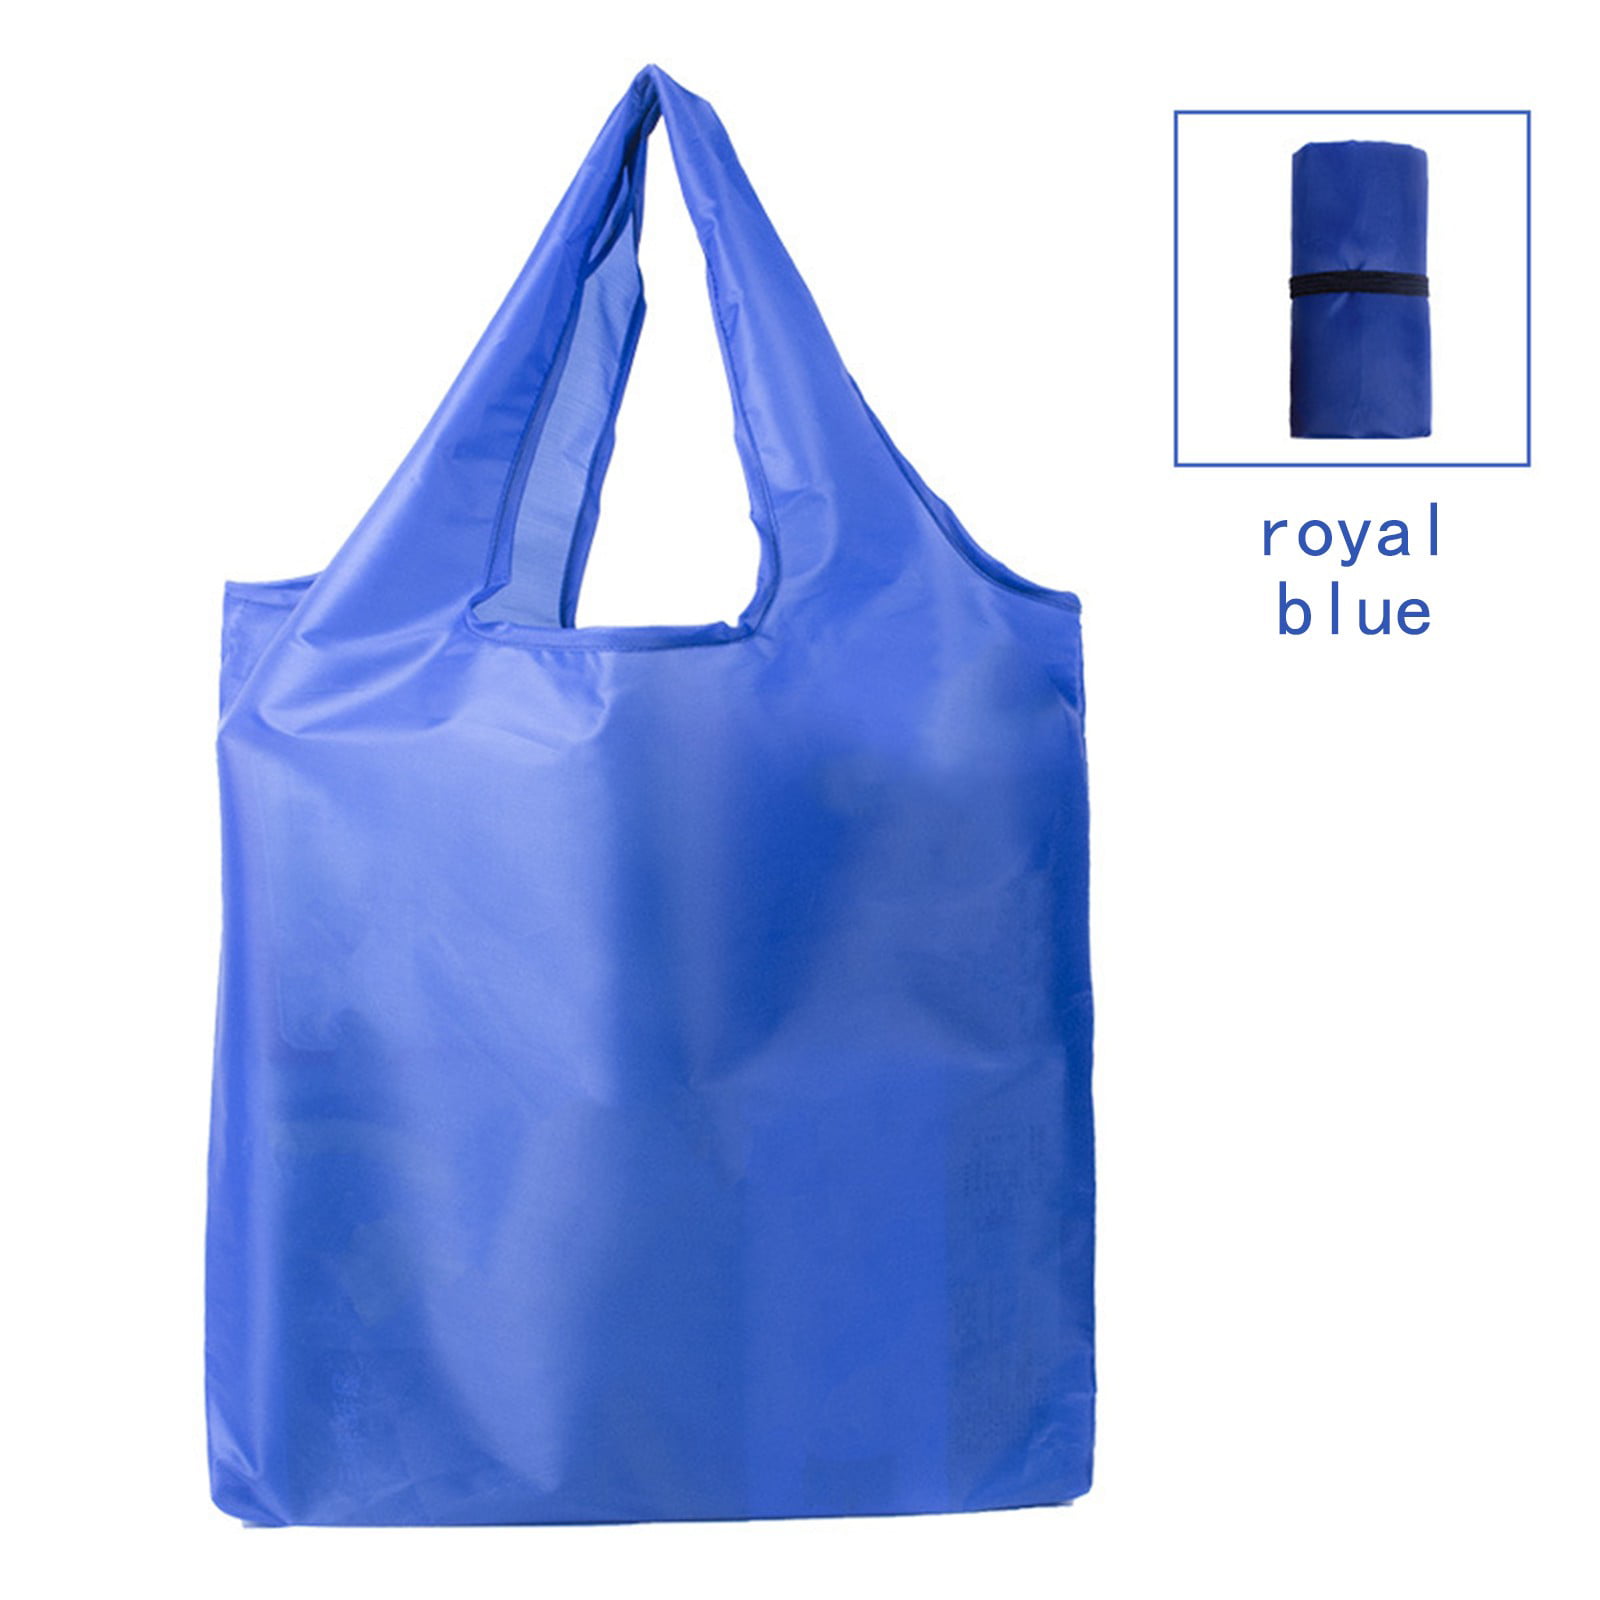 Home Home Foldable Recycle Shopping Reusable Grocery Food Vegetable Tote Bags